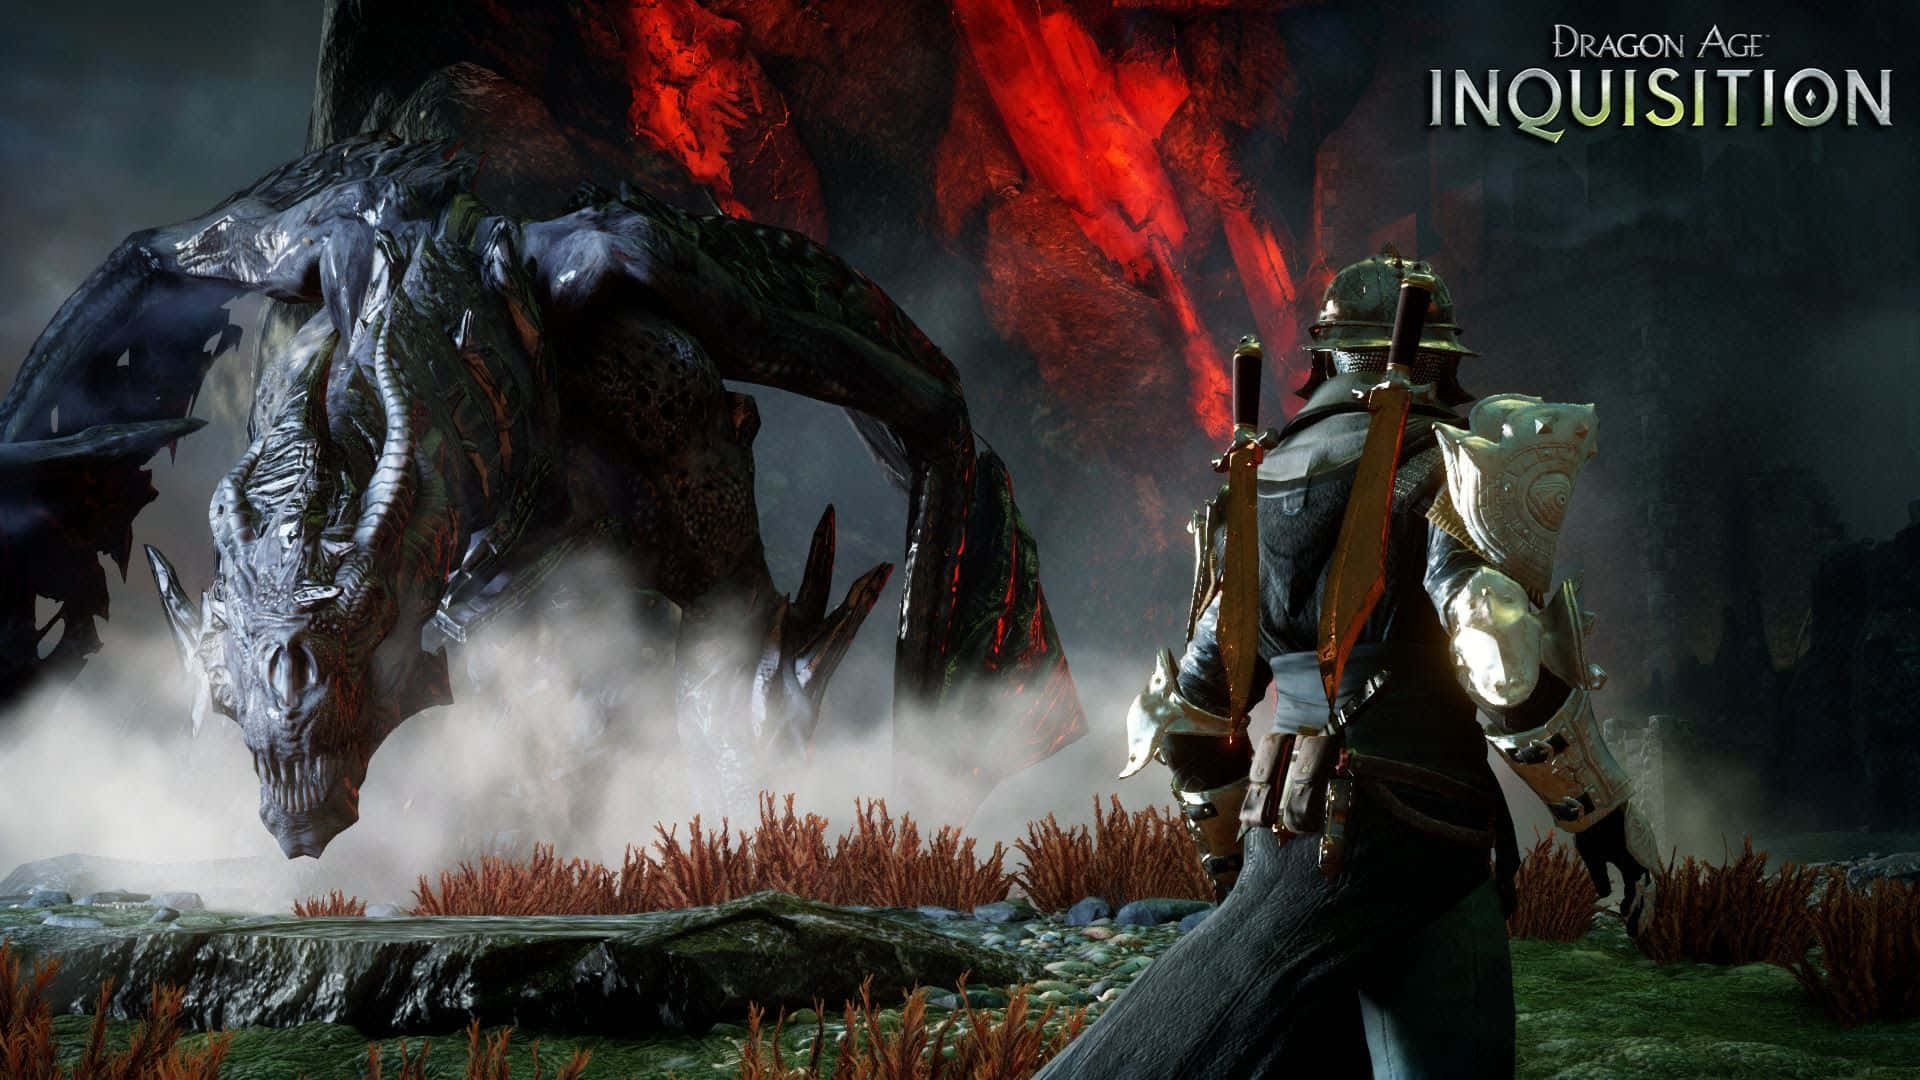 Conquer all Foes in the Epic Action RPG “Dragon Age Inquisition”